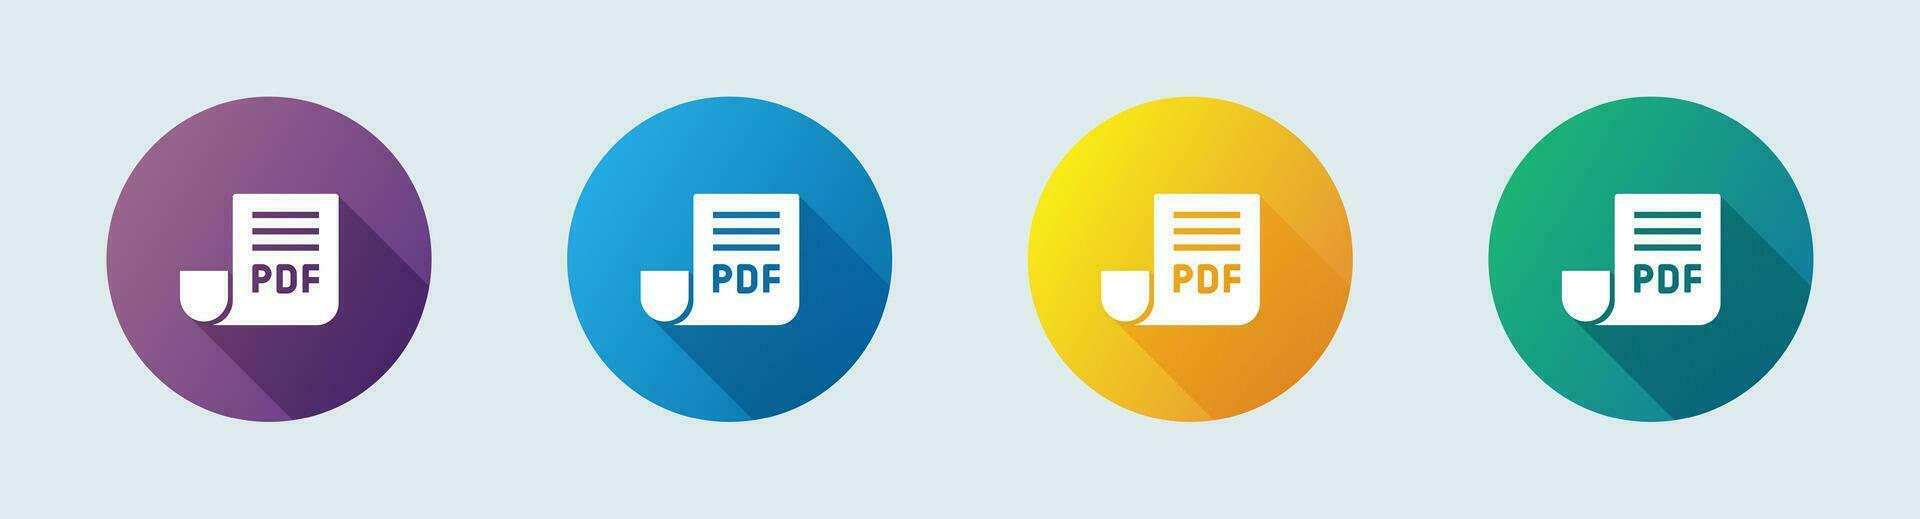 Pdf solid icon in flat design style. Format signs vector illustration.